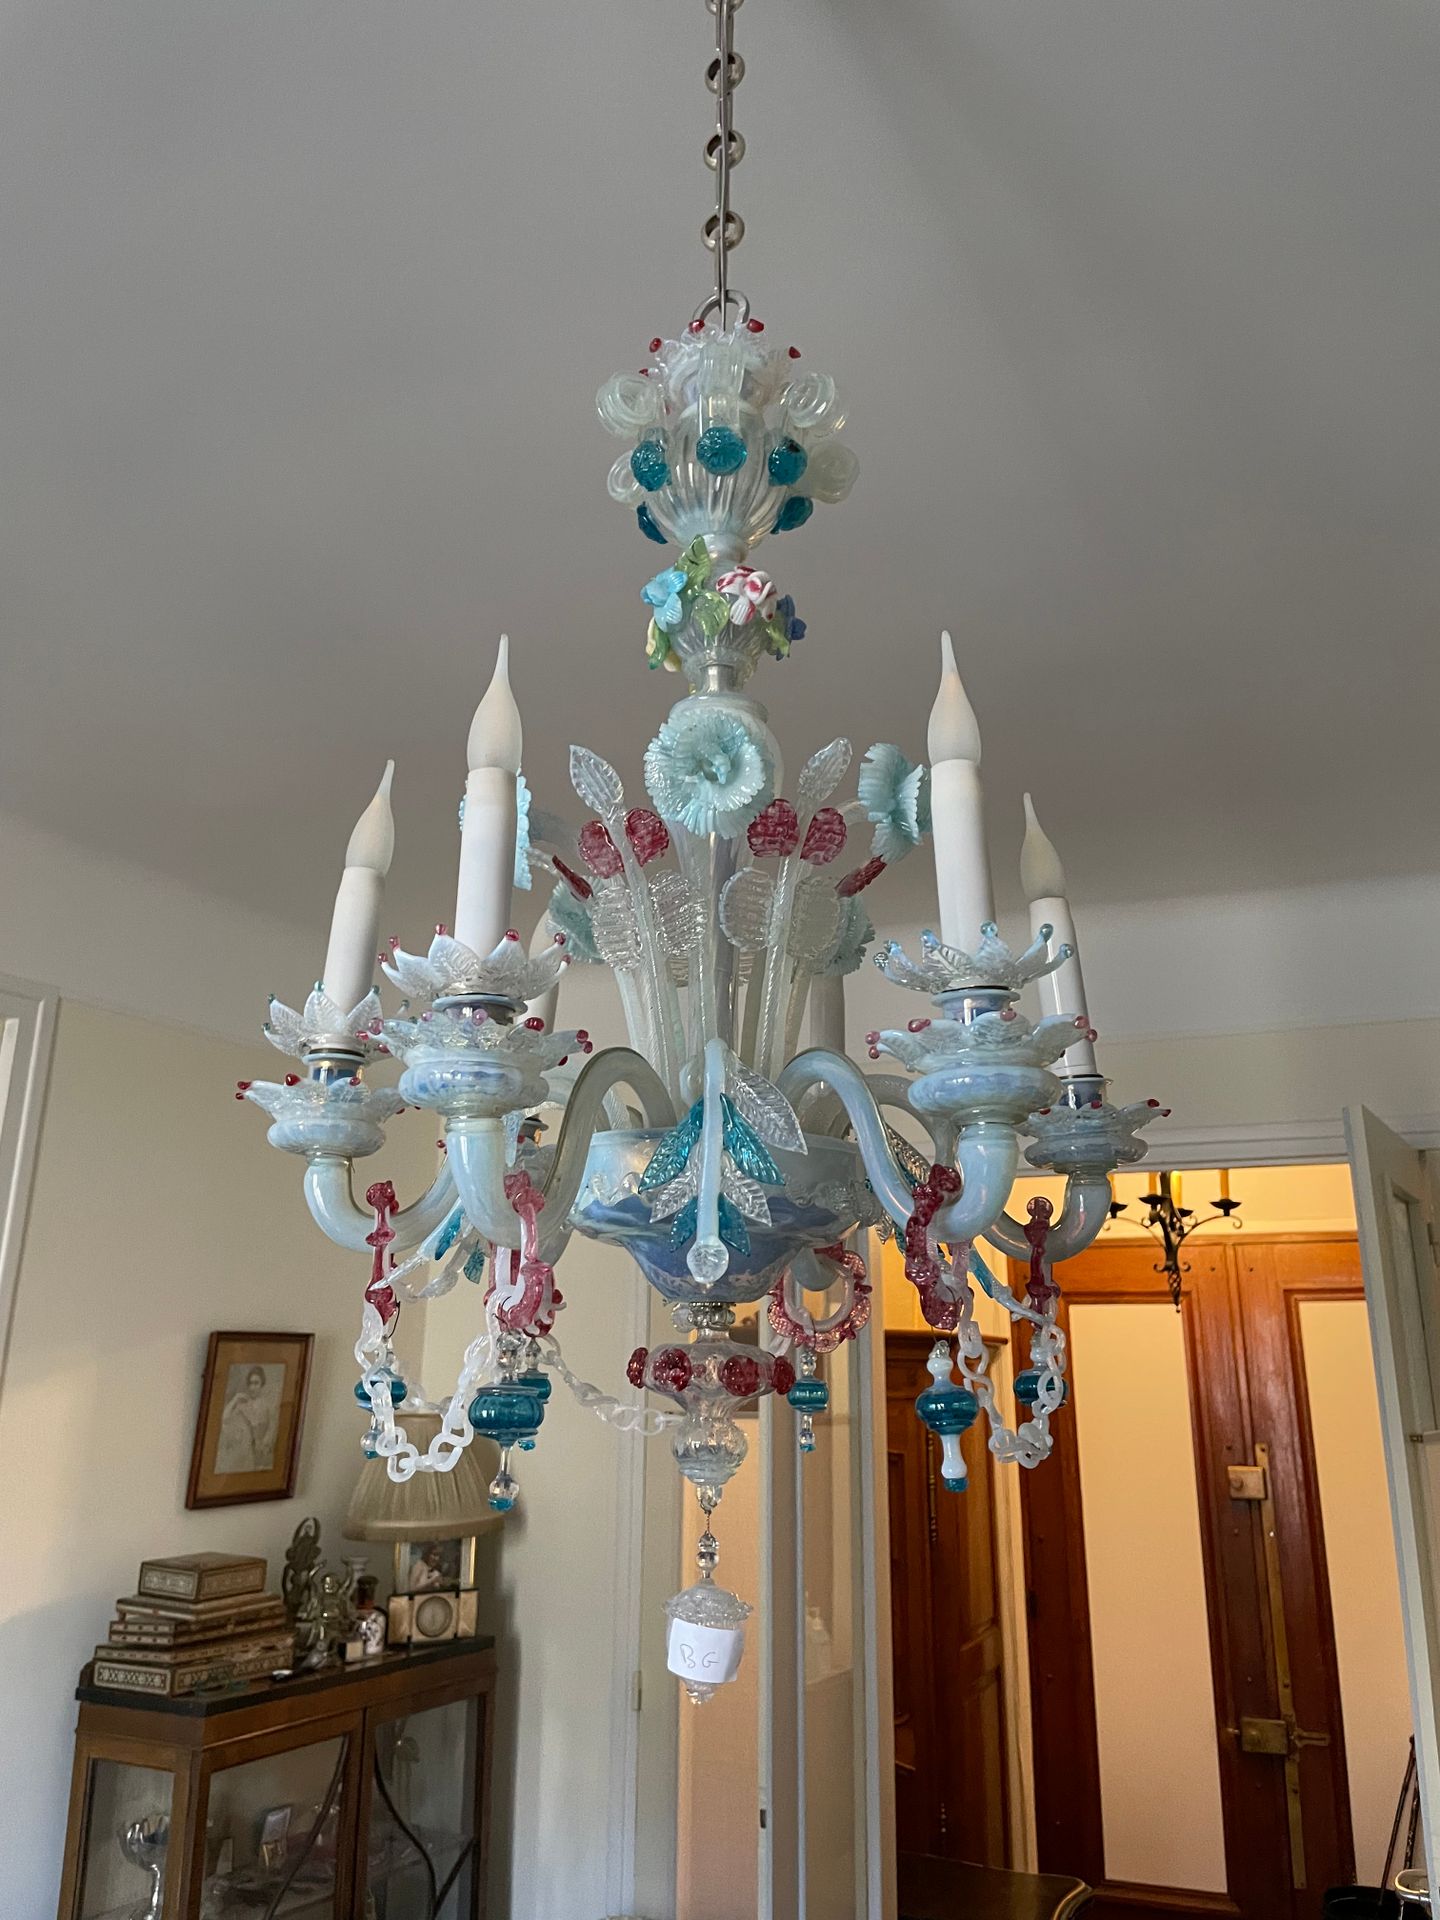 Null Chandelier
In polychrome opal glass of Venice
With six arms of light
Decora&hellip;